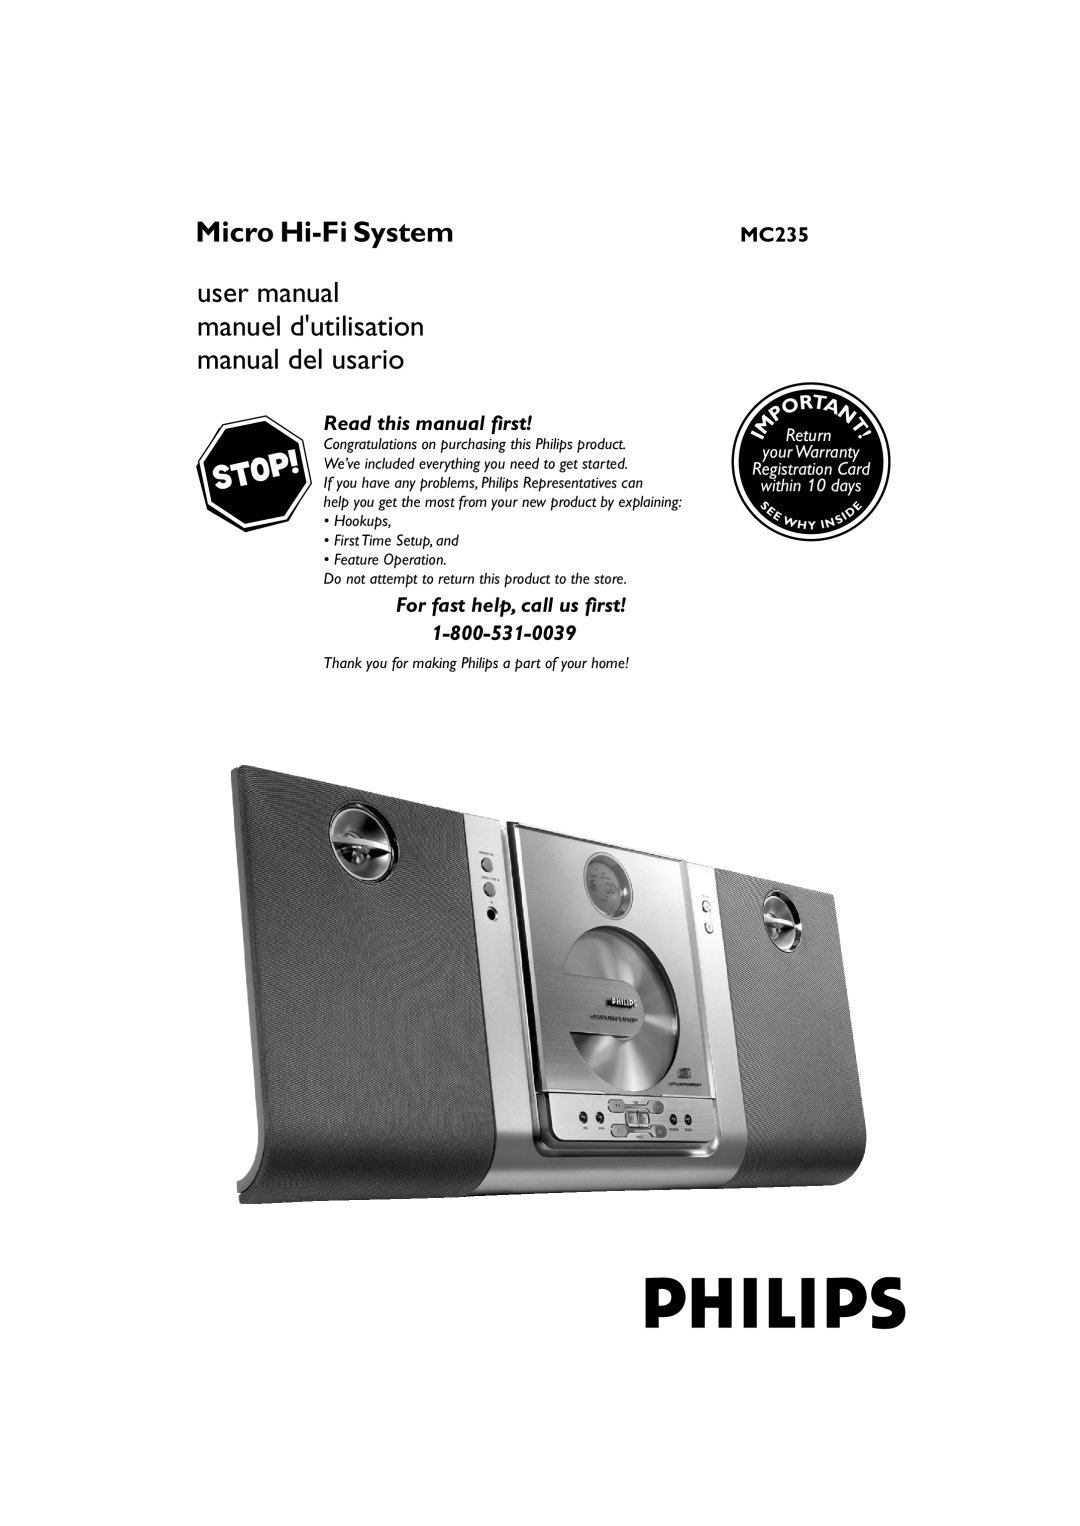 Philips MC235 user manual Micro Hi-FiSystem, your Warranty Registration Card within 10 days 